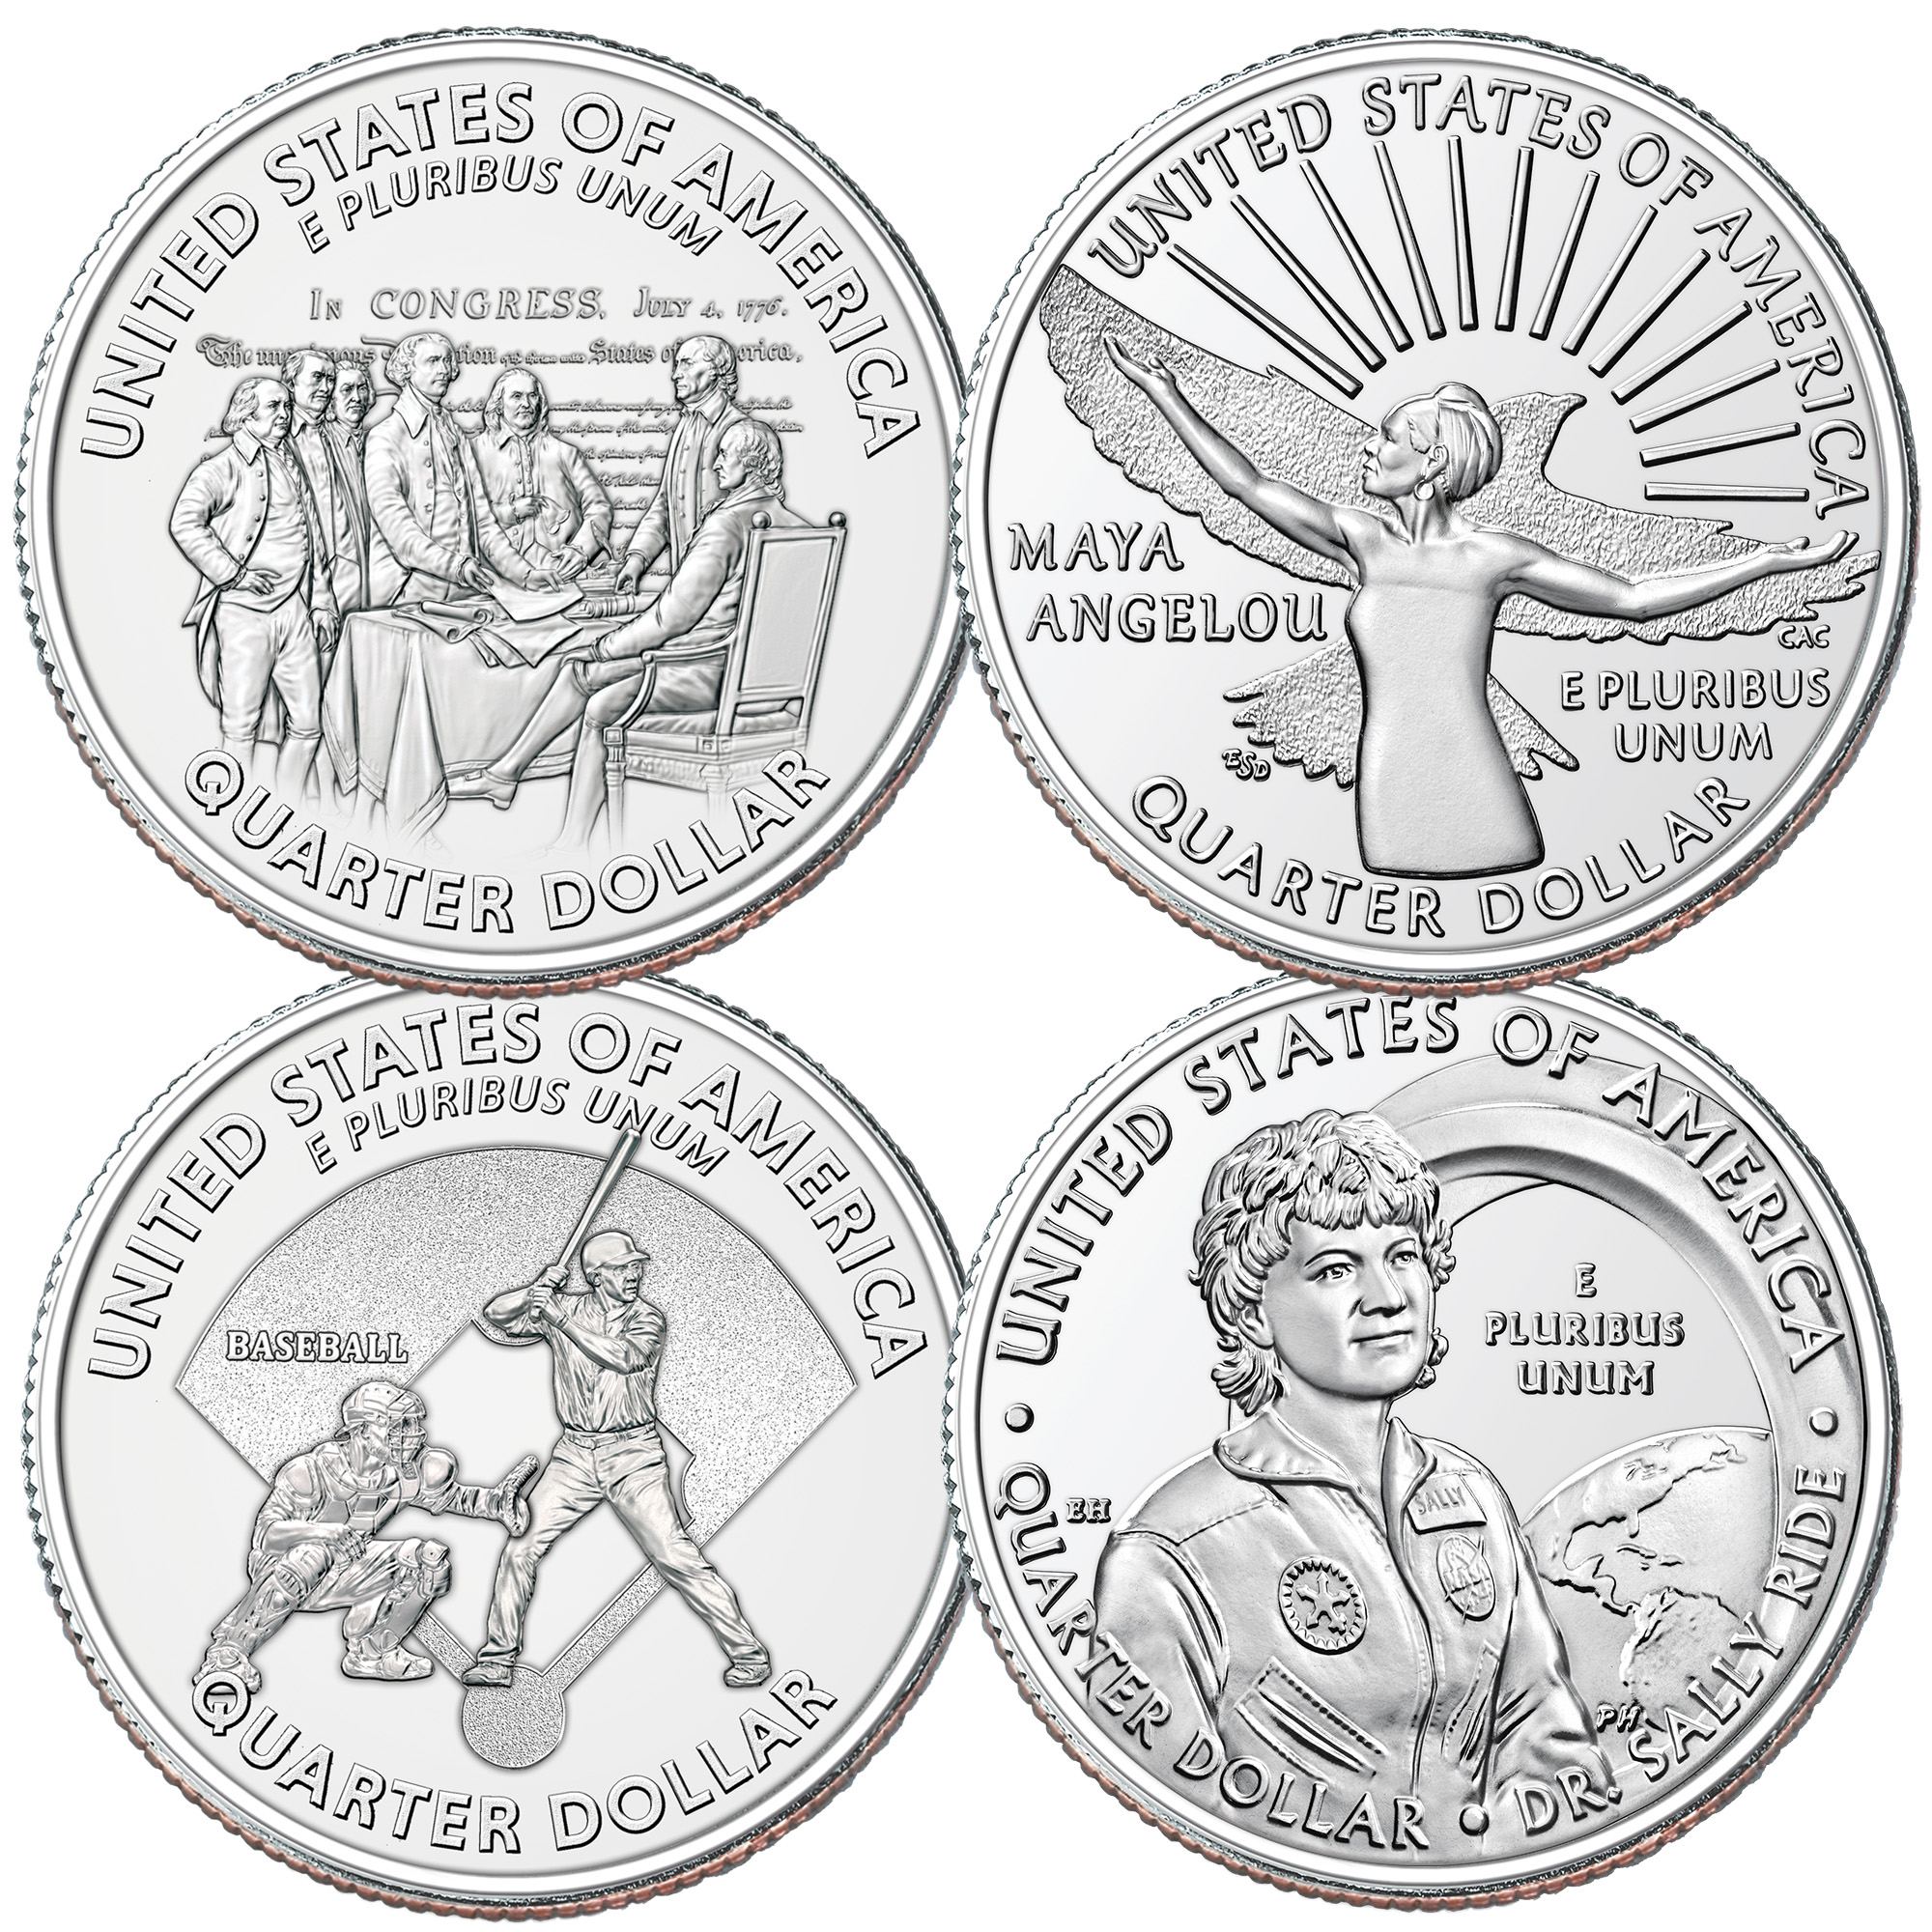 The Celebrating America Coin Collection